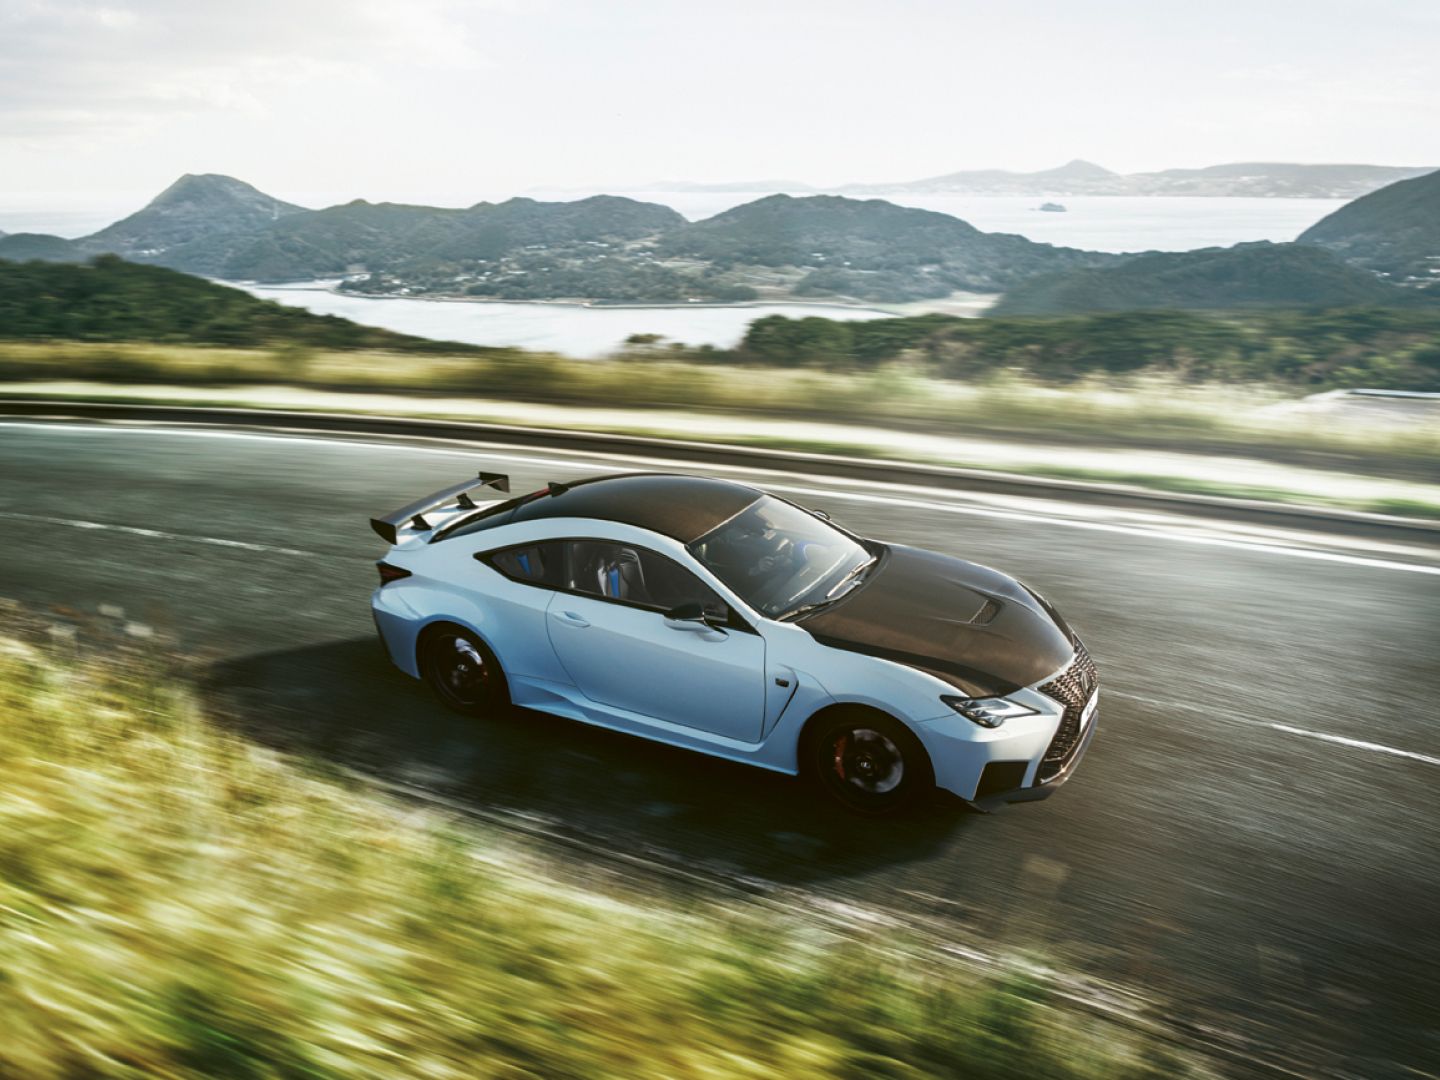 Lexus RC F driving on a road